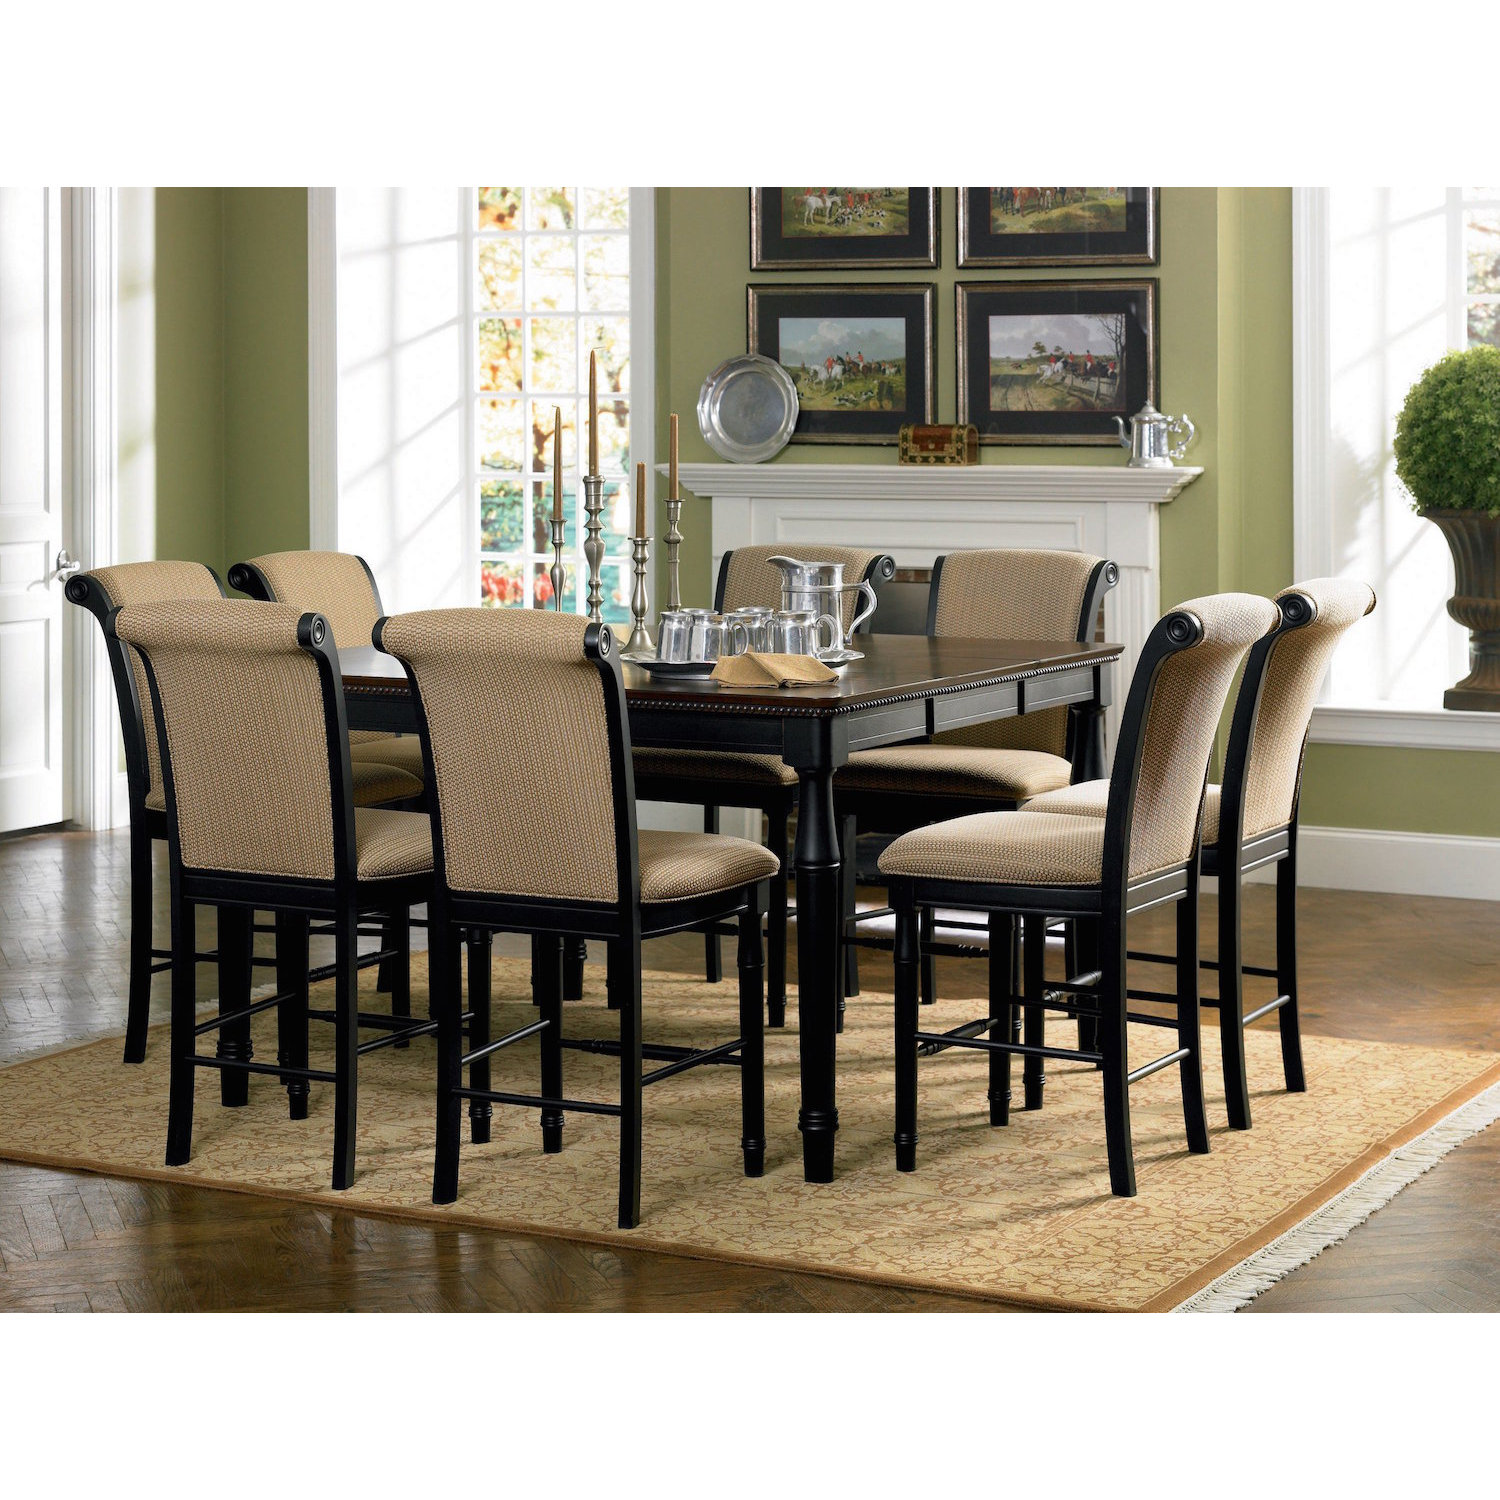 Infini Furnishings 9 Piece Counter Height Dining Set 